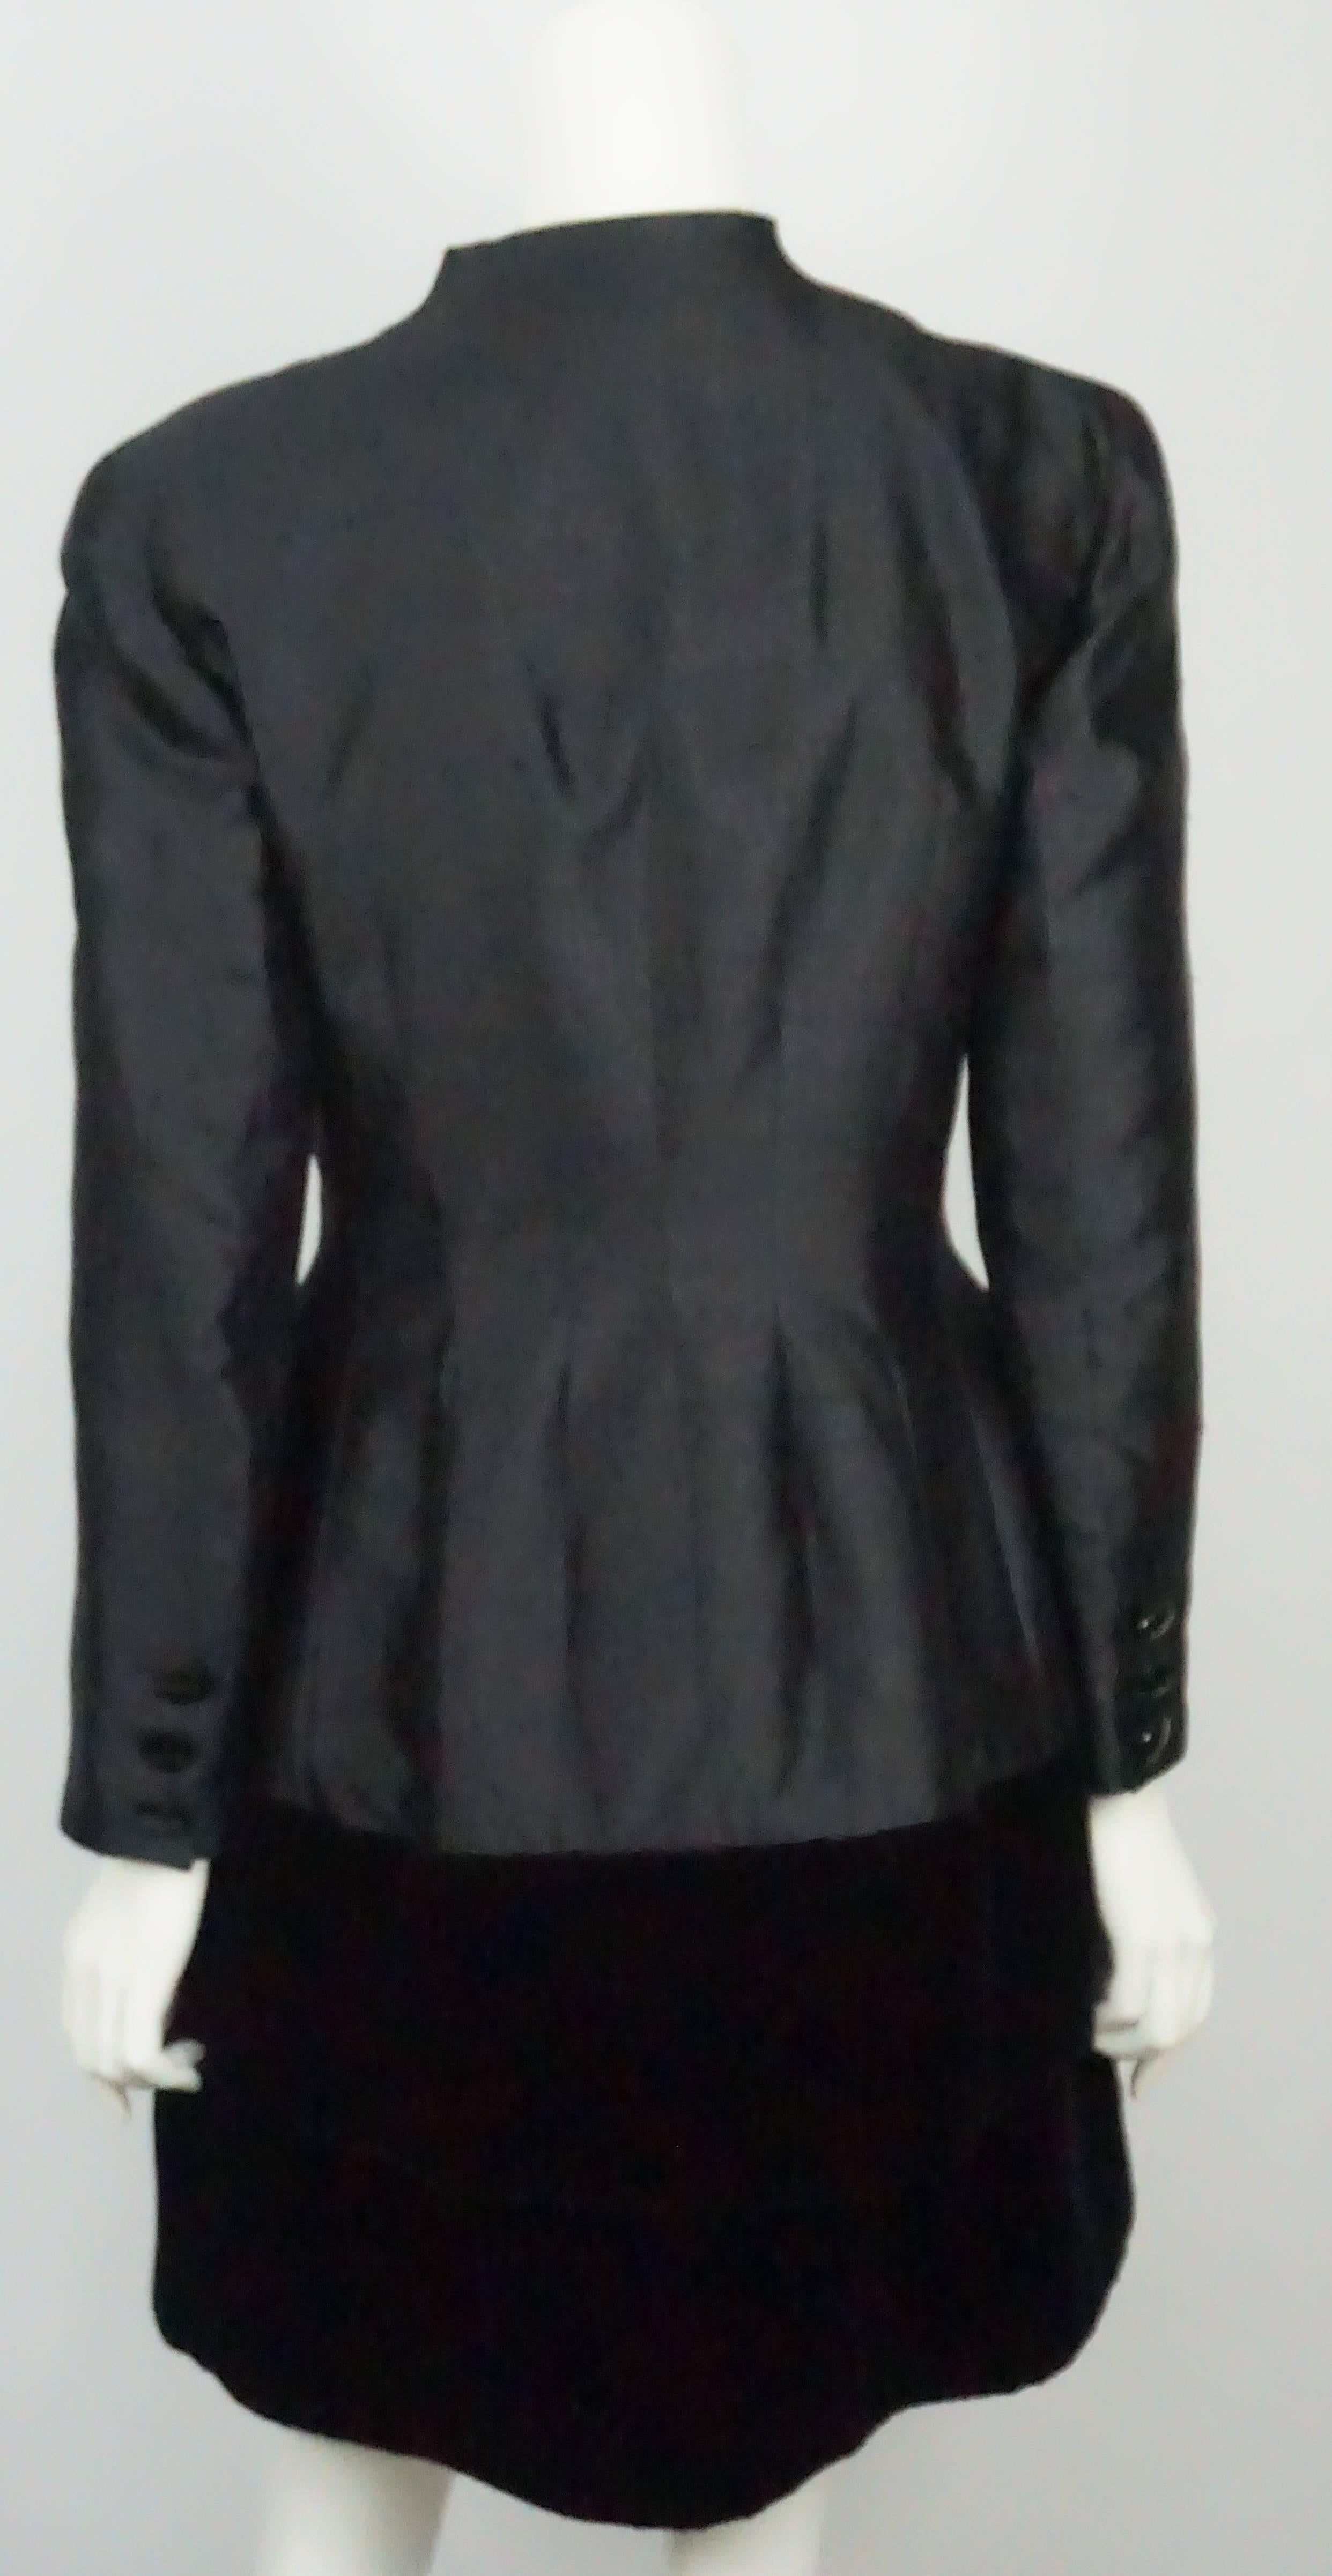 Valentino Black Silk and Velvet Dress with Coat - 10 - Circa 1980s In Excellent Condition For Sale In West Palm Beach, FL